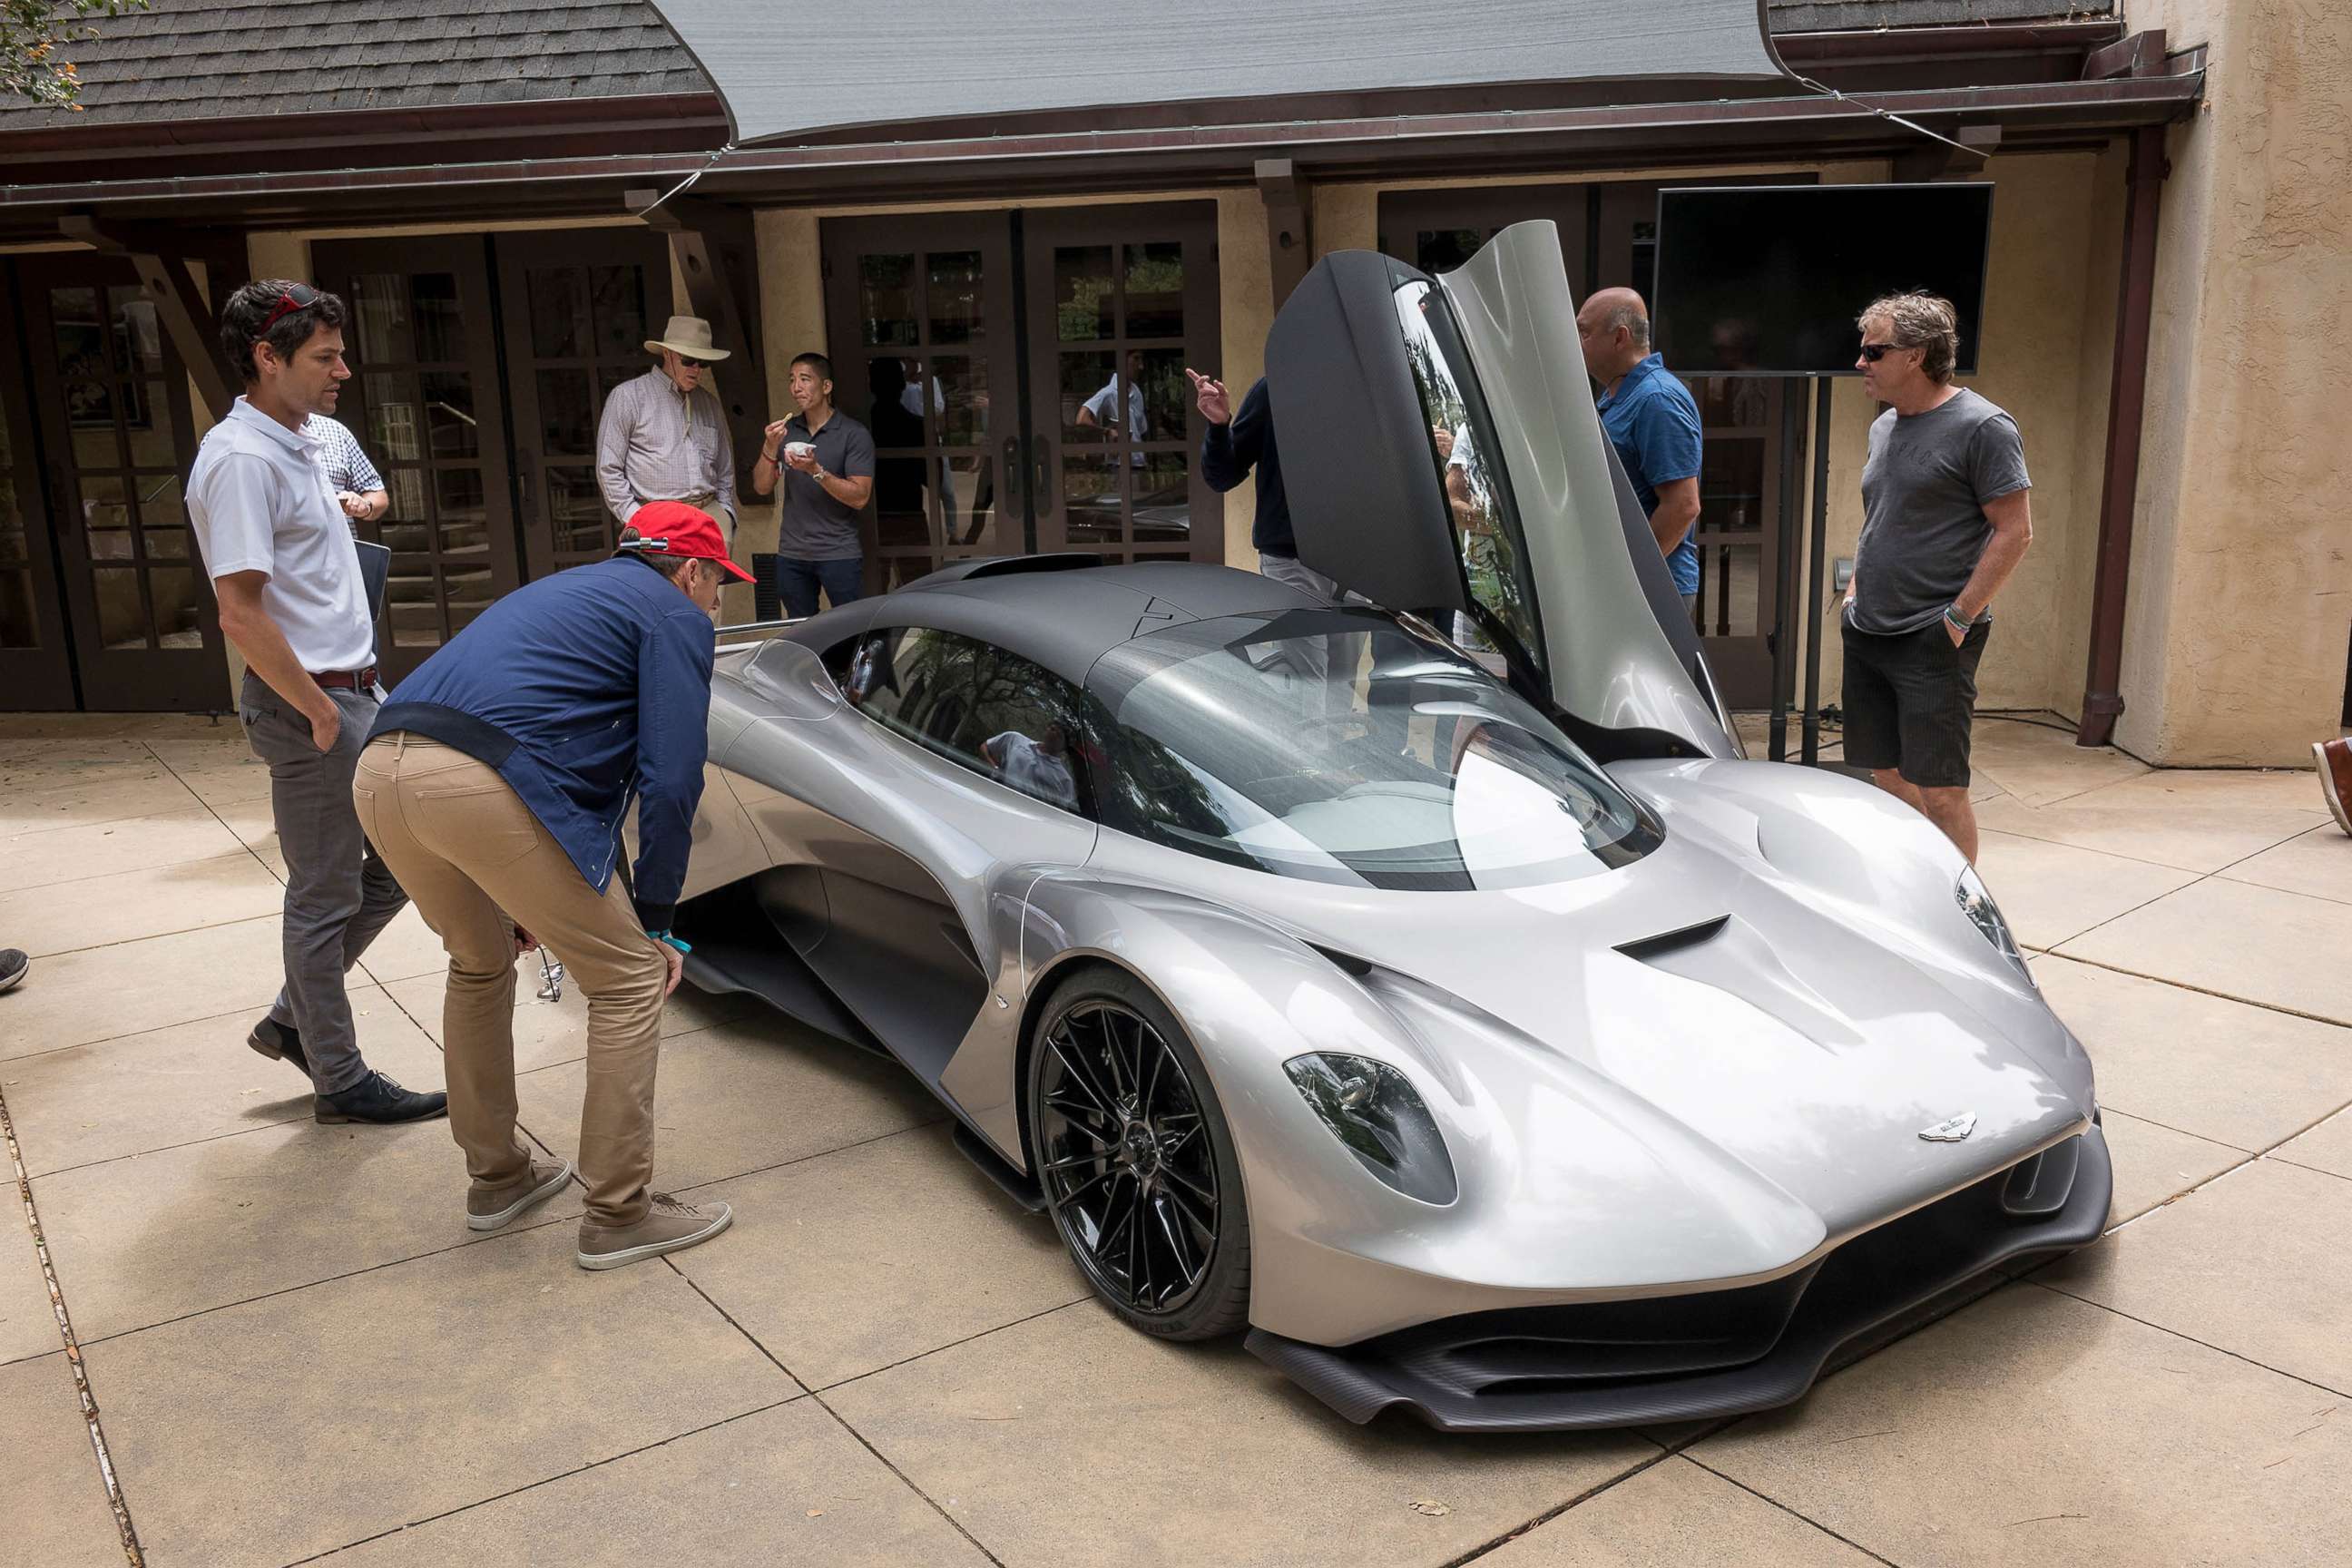 PHOTO: Attendees view the Aston Martin Lagonda Ltd. Valhalla supercar on display during an event at the 2019 Pebble Beach Concours d'Elegance in Carmel, Calif, Aug. 17, 2019.